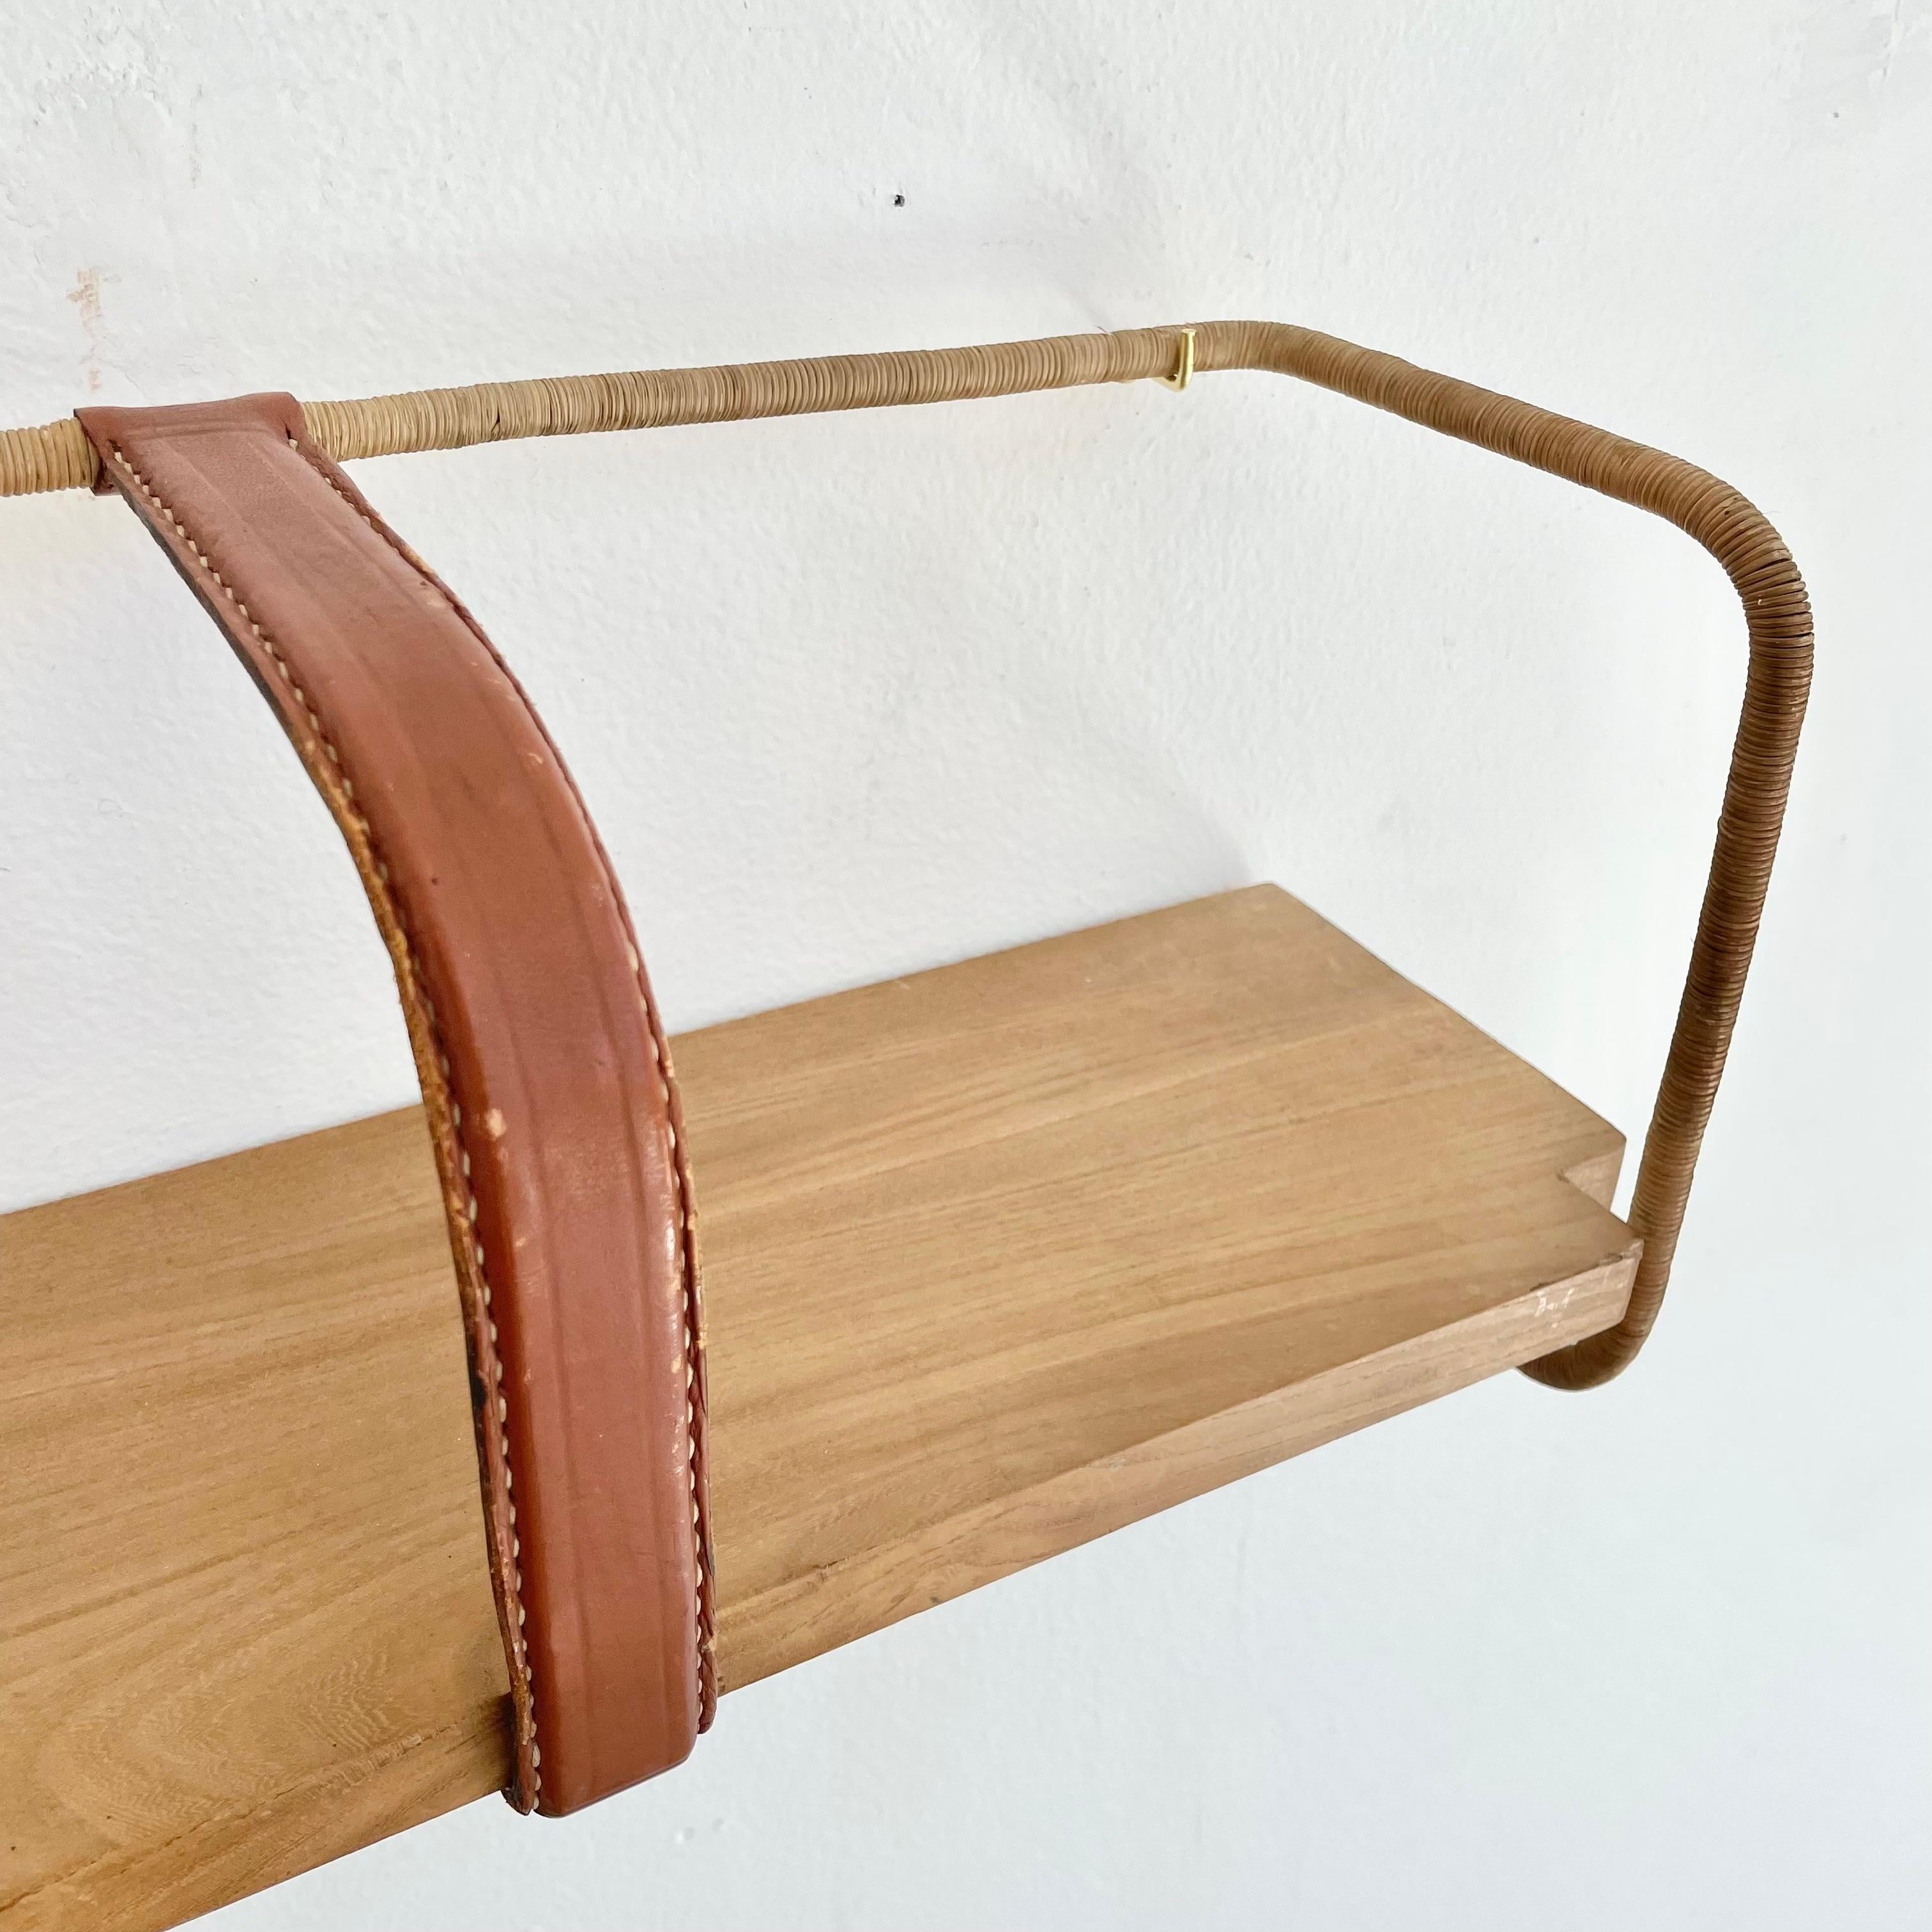 Jacques Adnet Leather, Wood and Twine Shelf, 1950s France For Sale 12